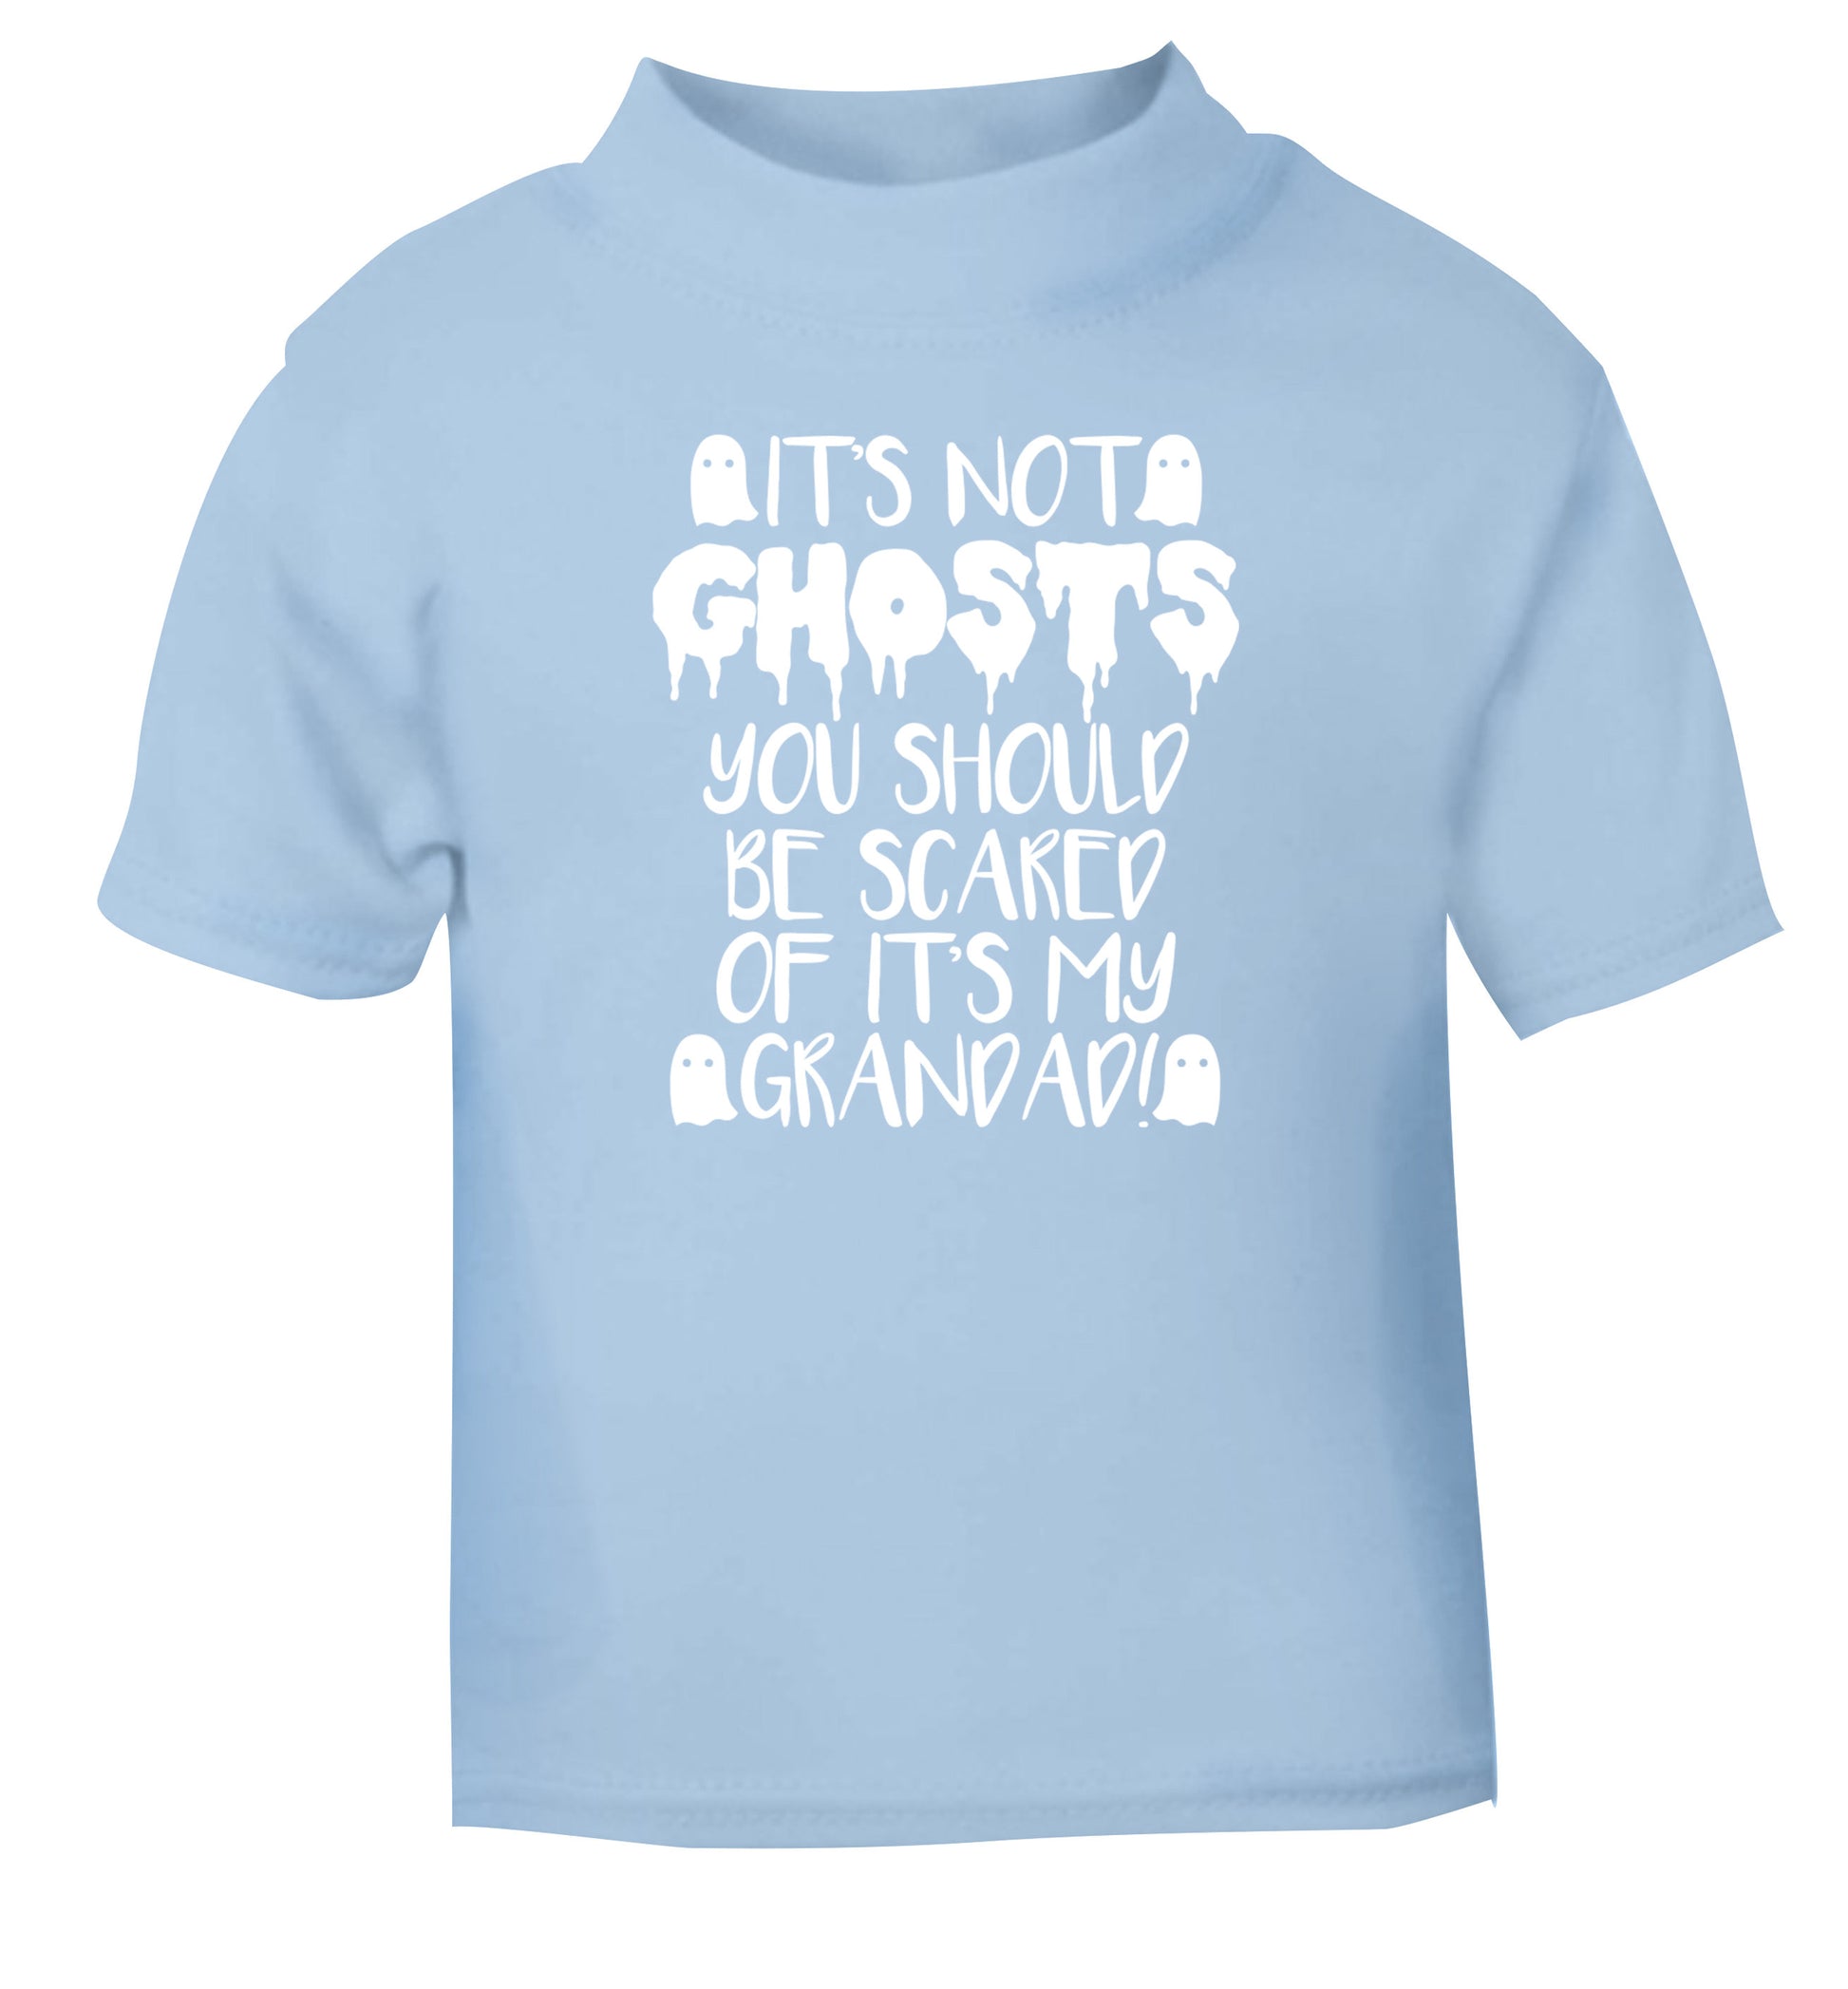 It's not ghosts you should be scared of it's my grandad! light blue Baby Toddler Tshirt 2 Years